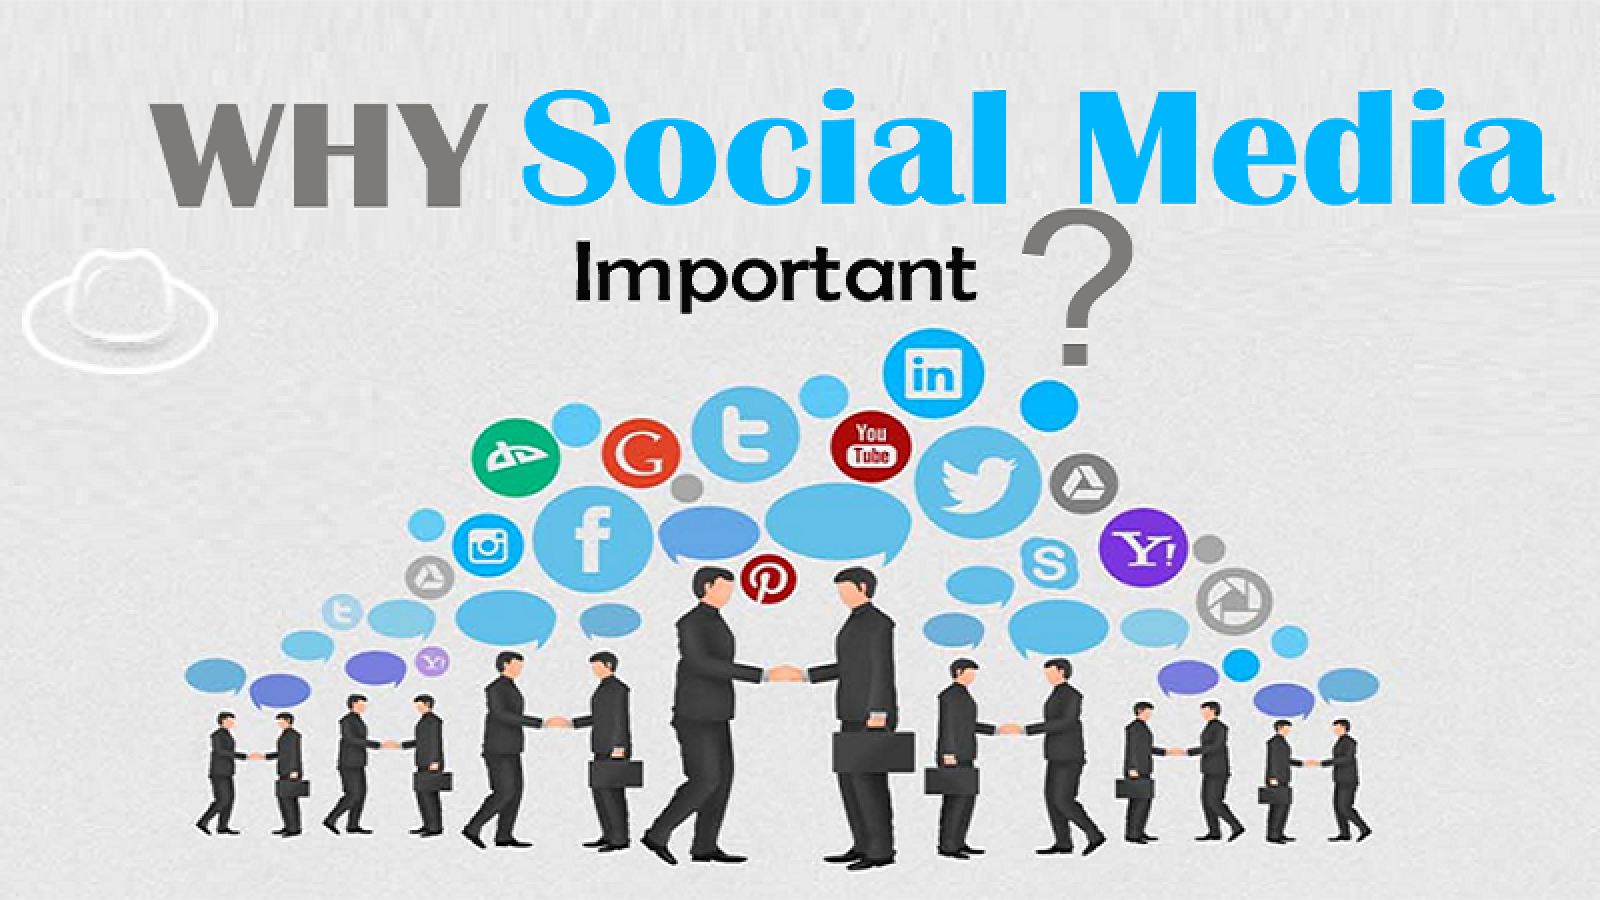 How Important is Social Media